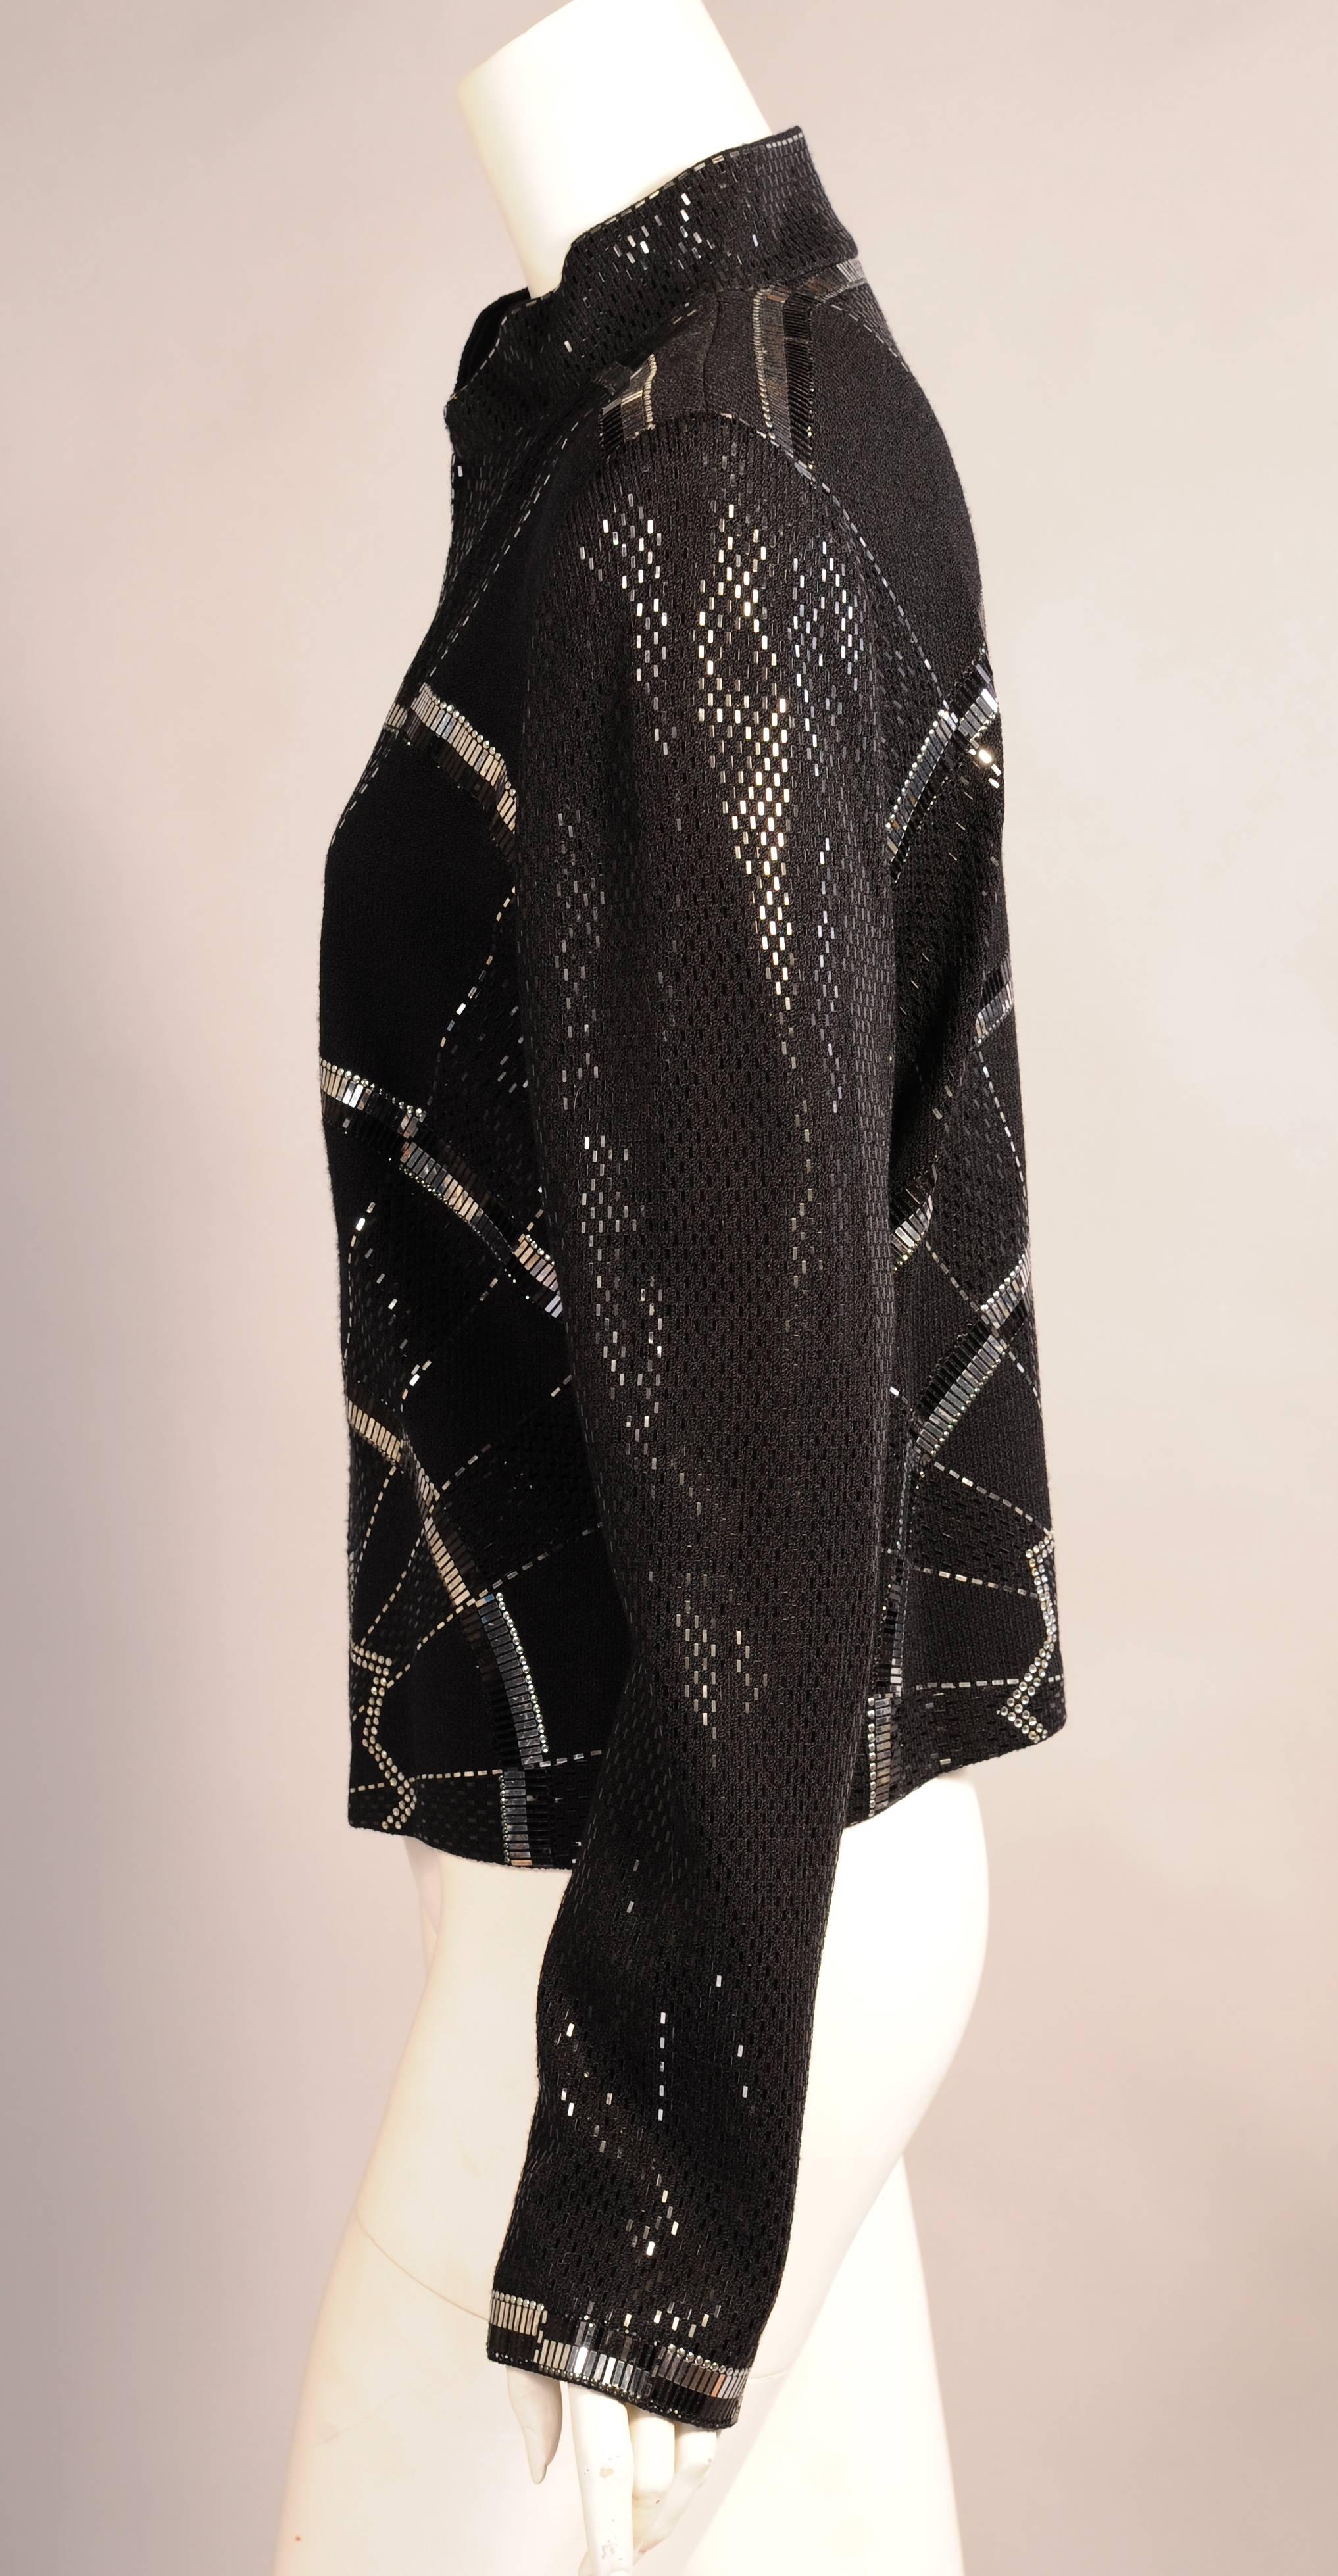 An Art Deco inspired bold and graphic design is worked in silver and black on this chic black wool jacket. Long flat black and silver bands, small silver dots, rhinestones and black sequins are all used in the design. The jacket has a zippered